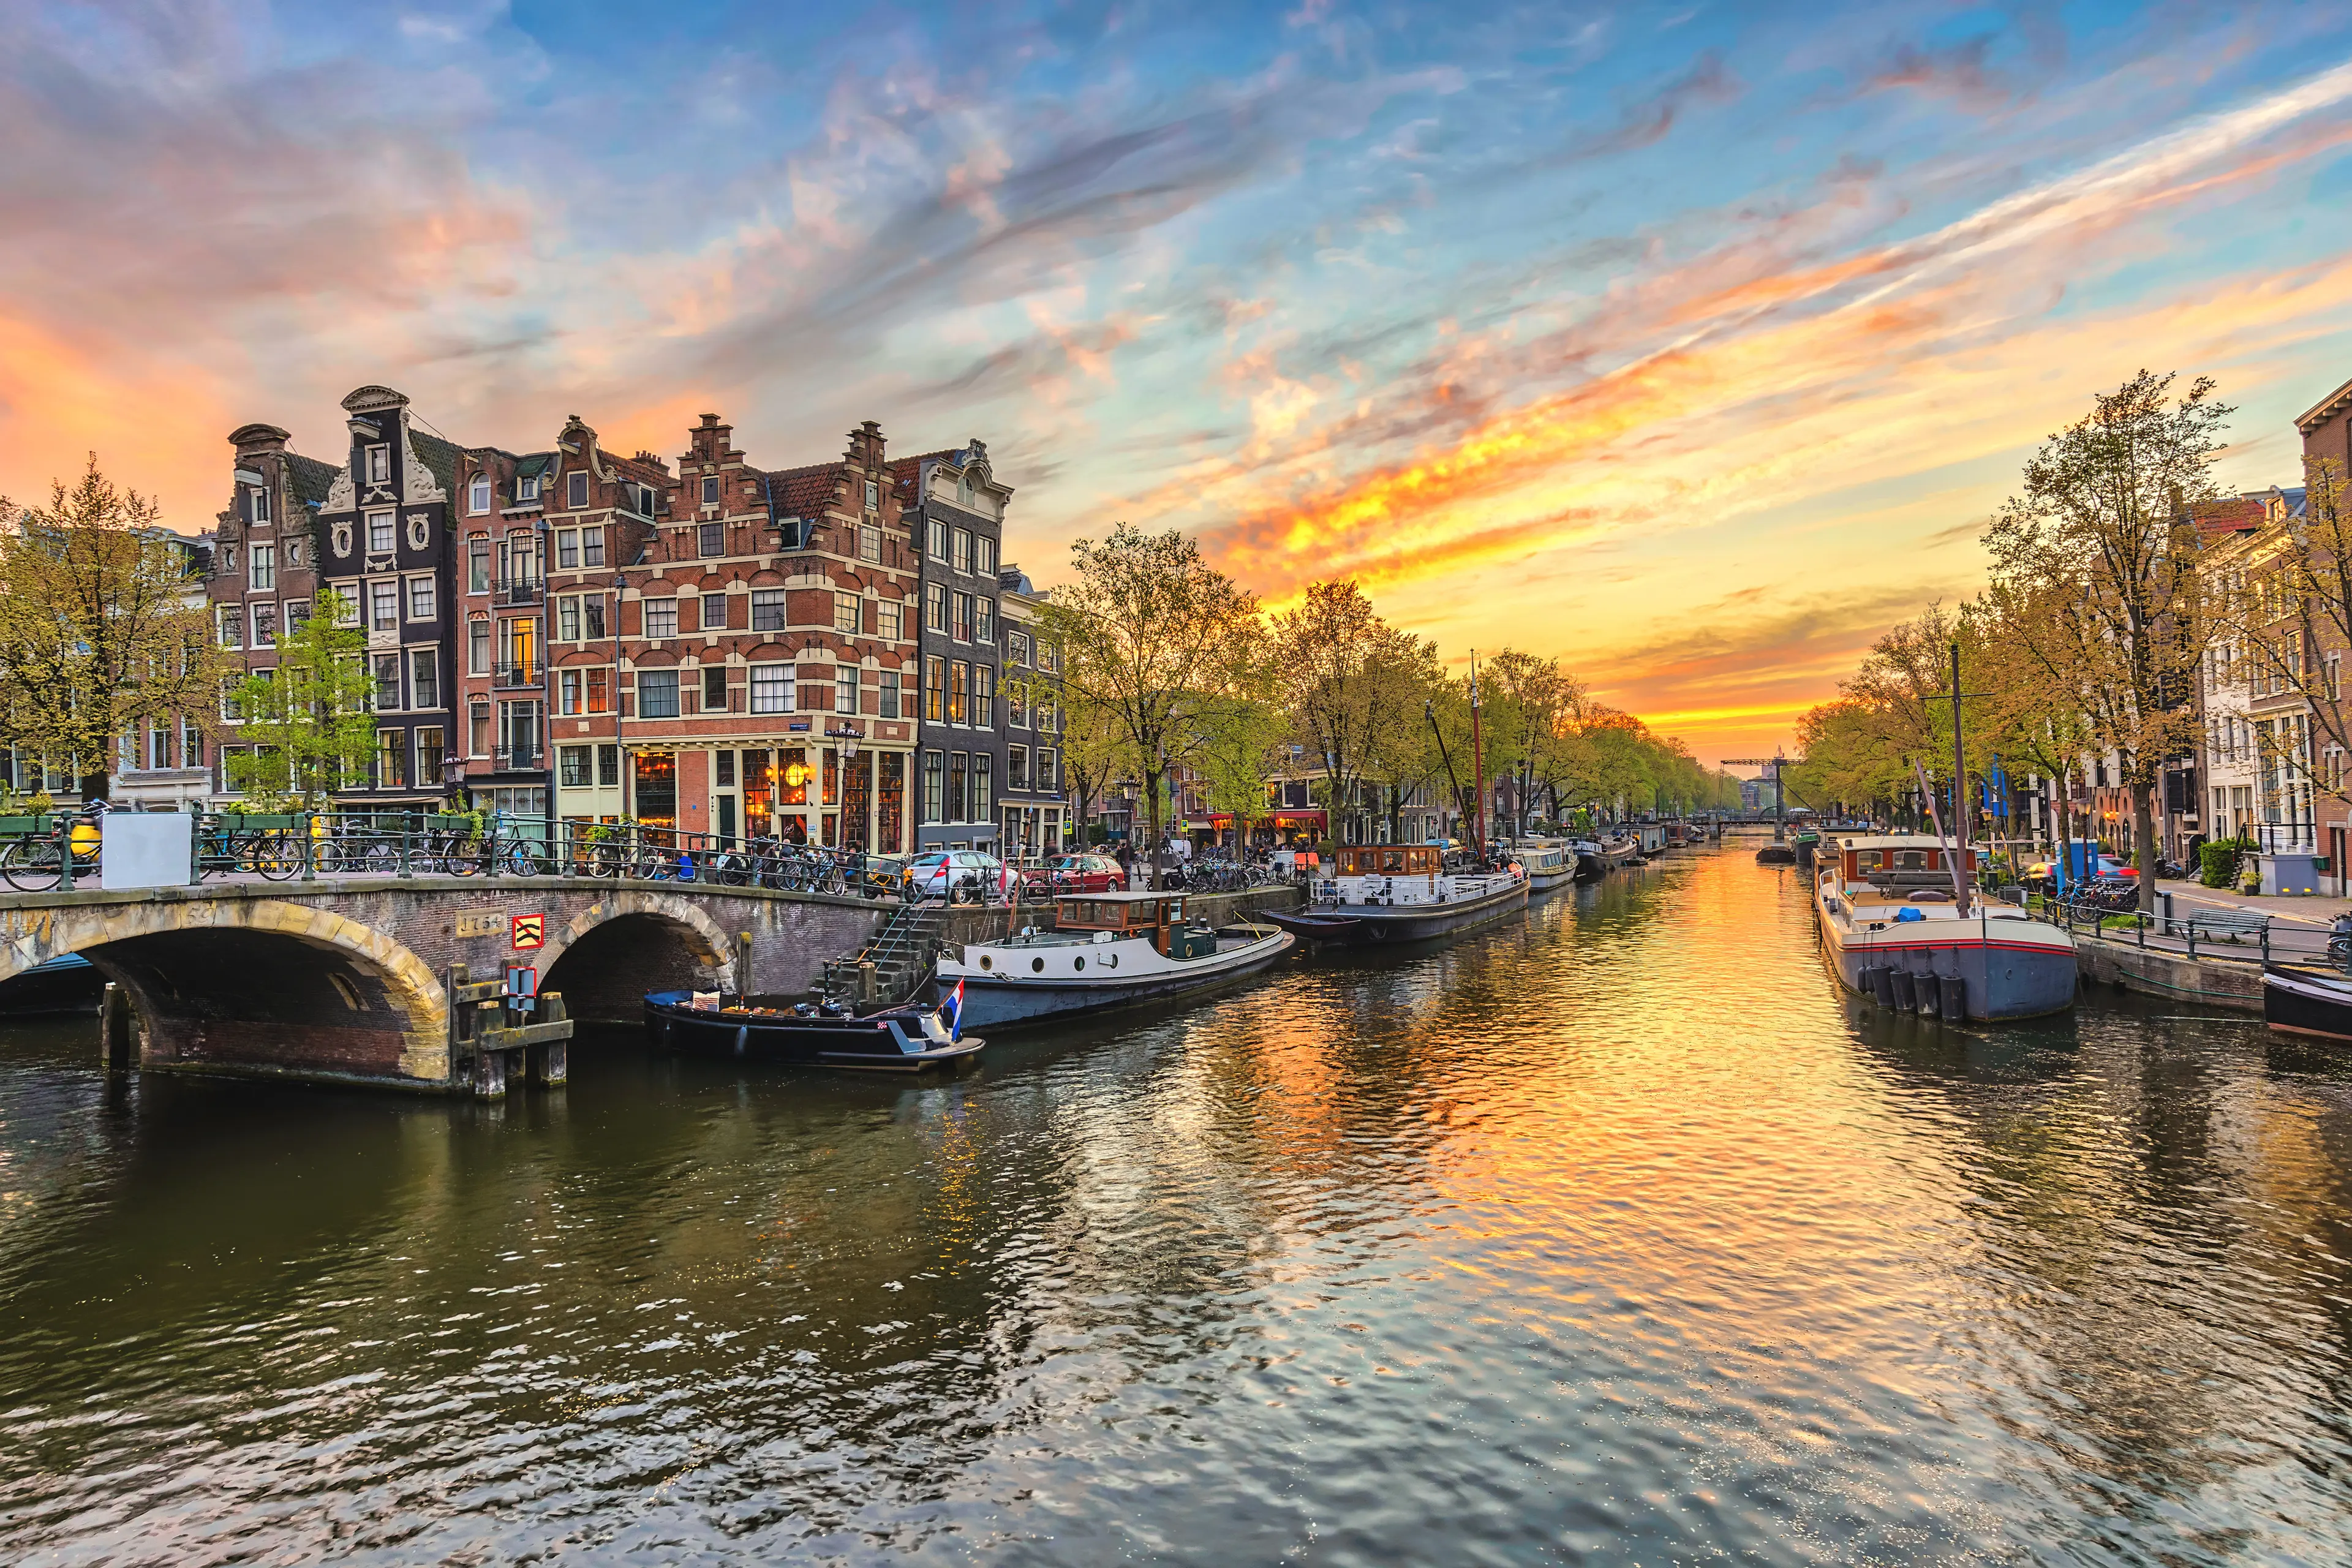 3-Day Unique Family Adventure: Outdoor, Shopping & Sightseeing in Amsterdam